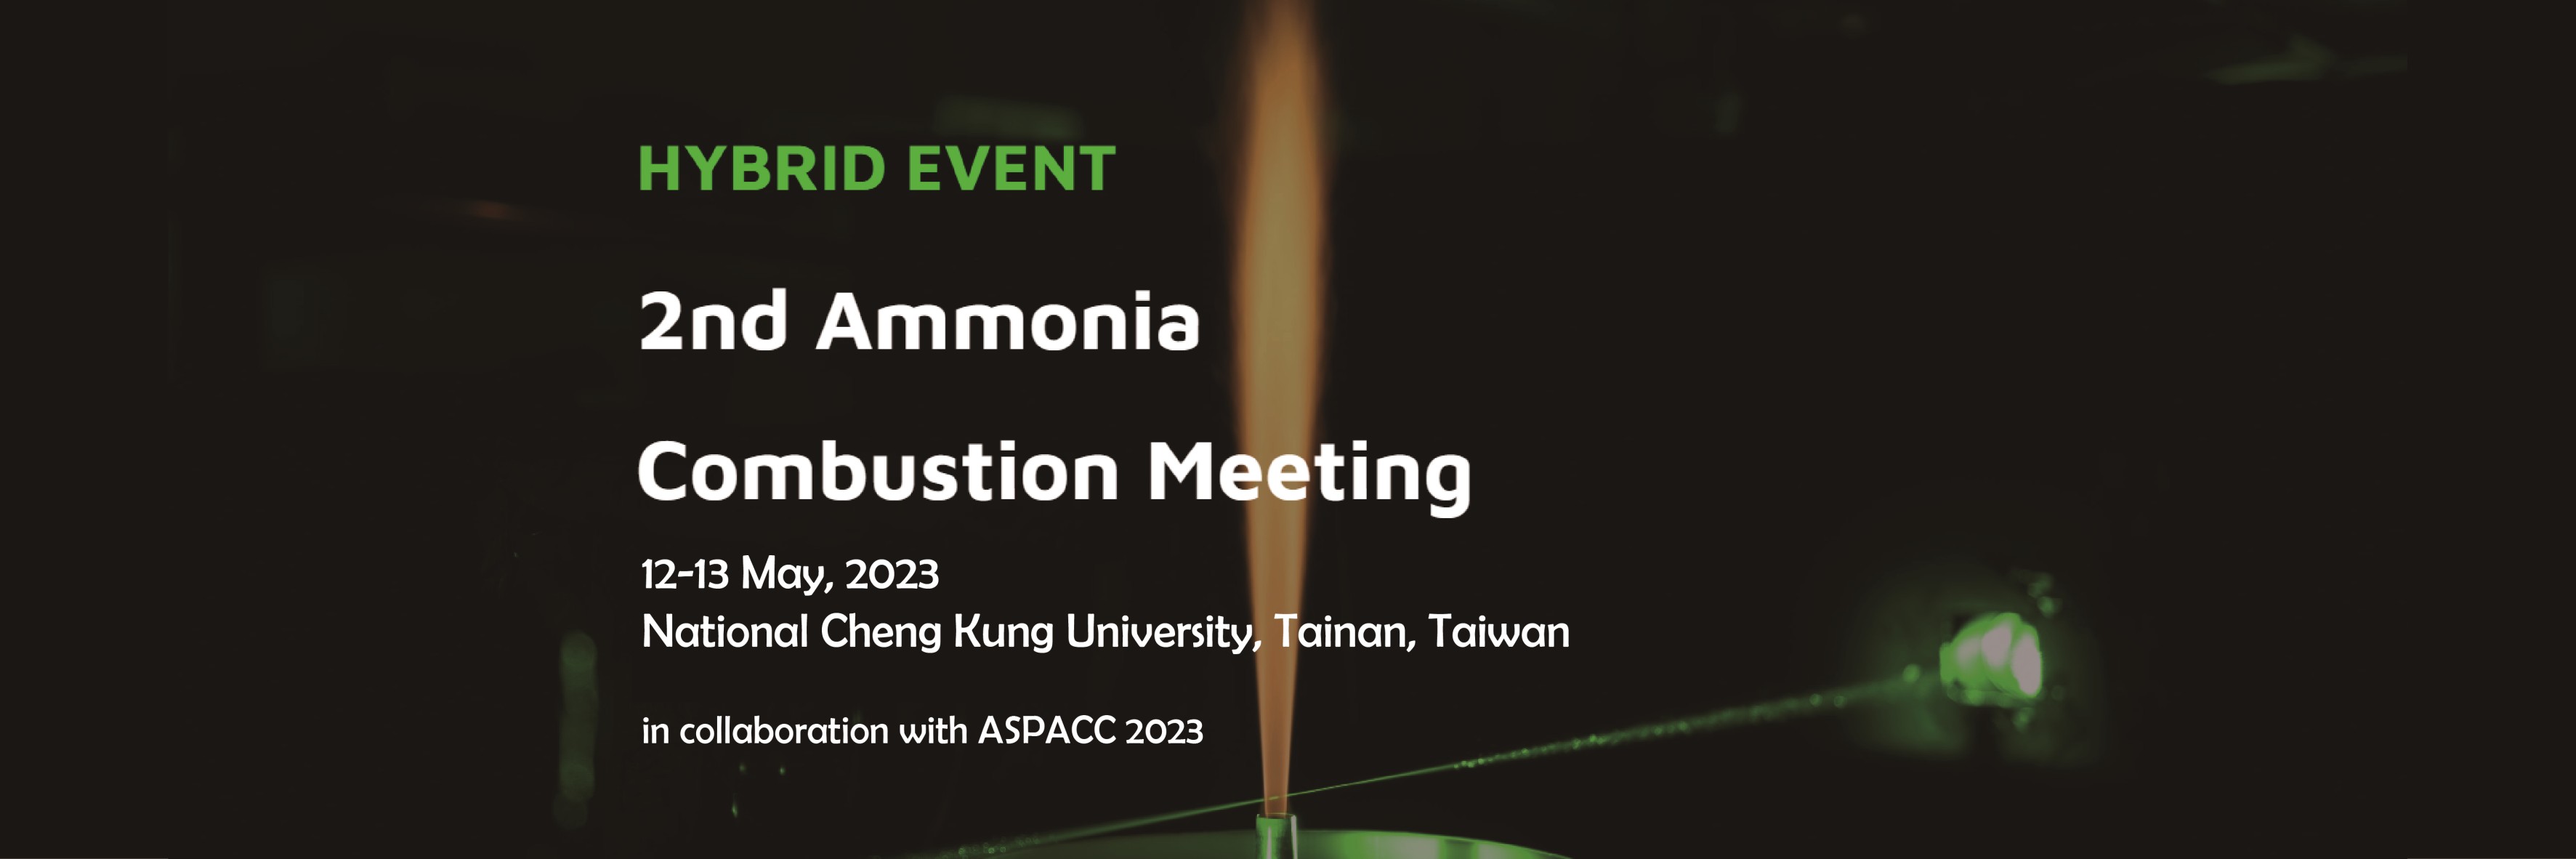 2nd Ammonia Combustion Meeting